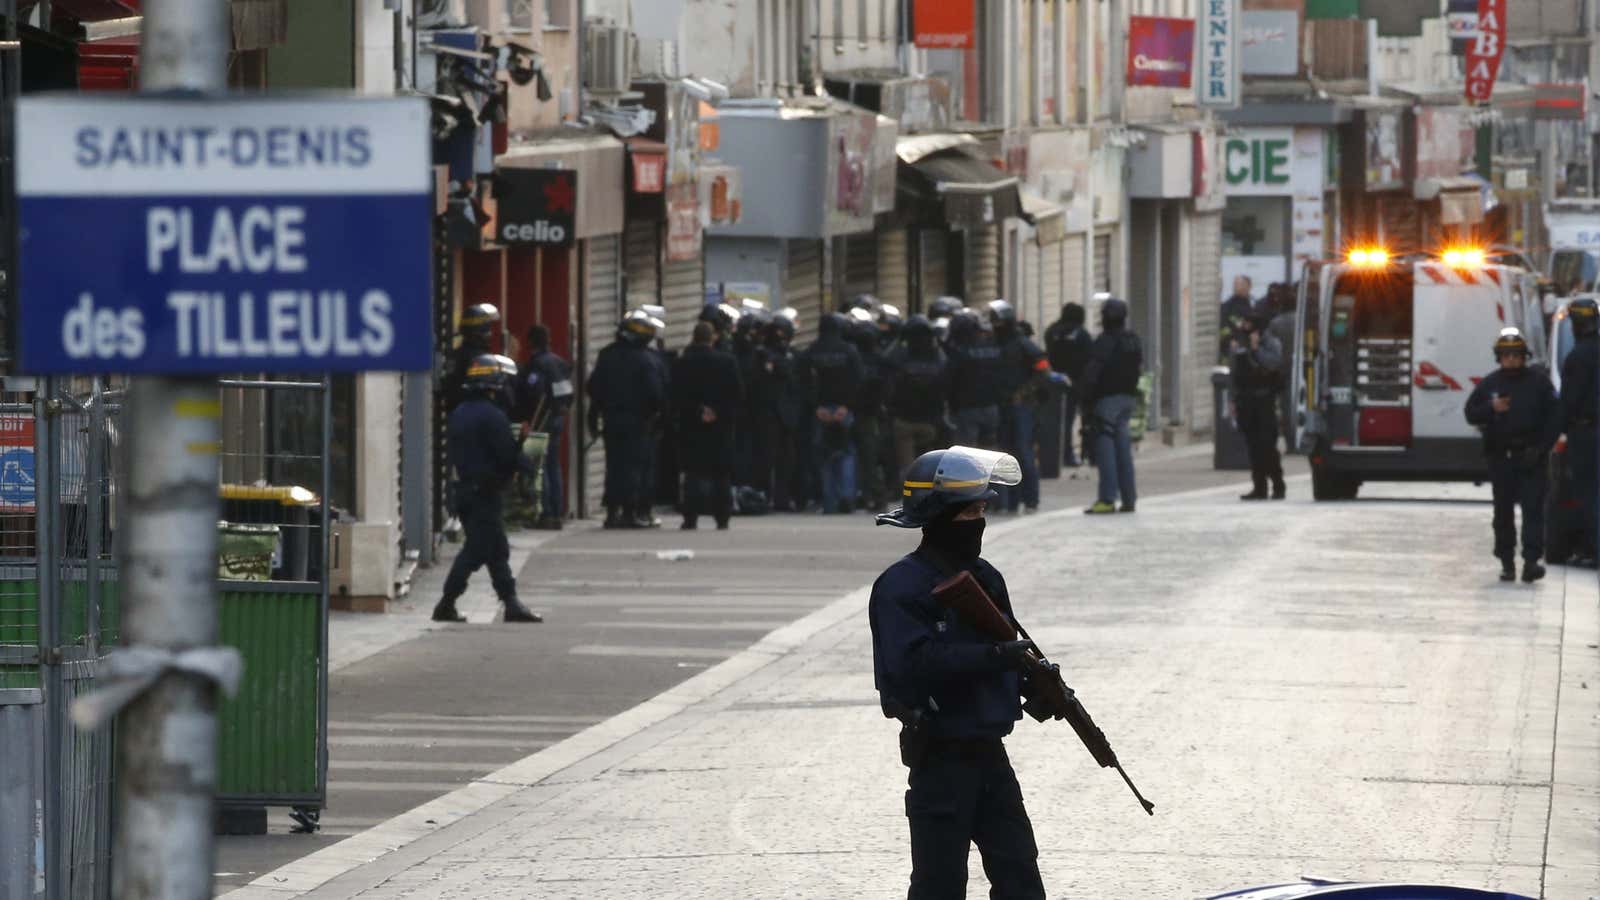 French riot police (CRS) secure the area as shots are exchanged in Saint-Denis, France, near Paris, November 18, 2015 during an operation to catch fugitives…